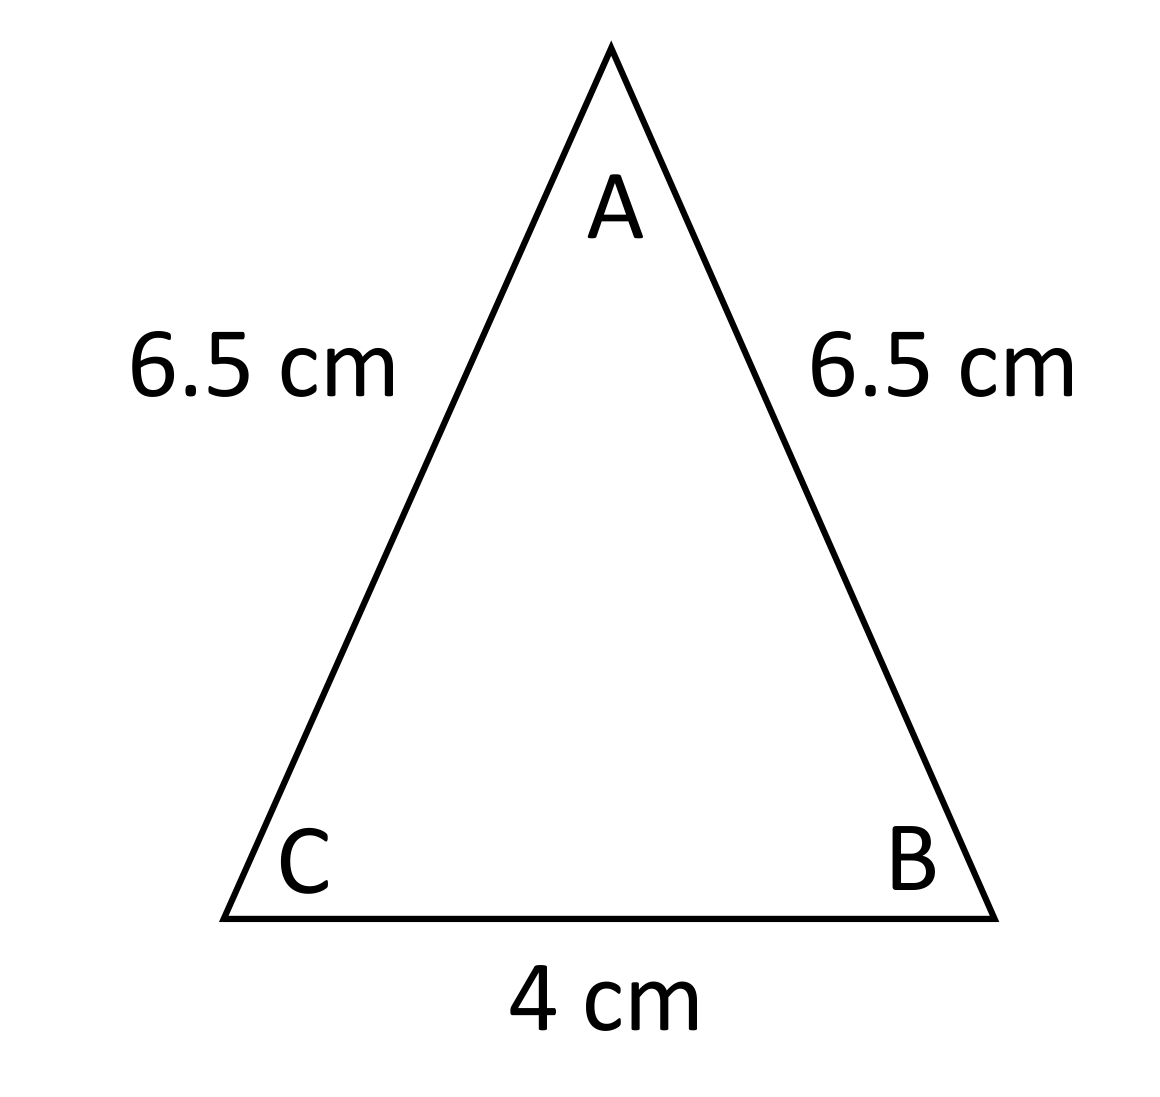 Triangle with side lengths 6.5,6.5, and 4 cm